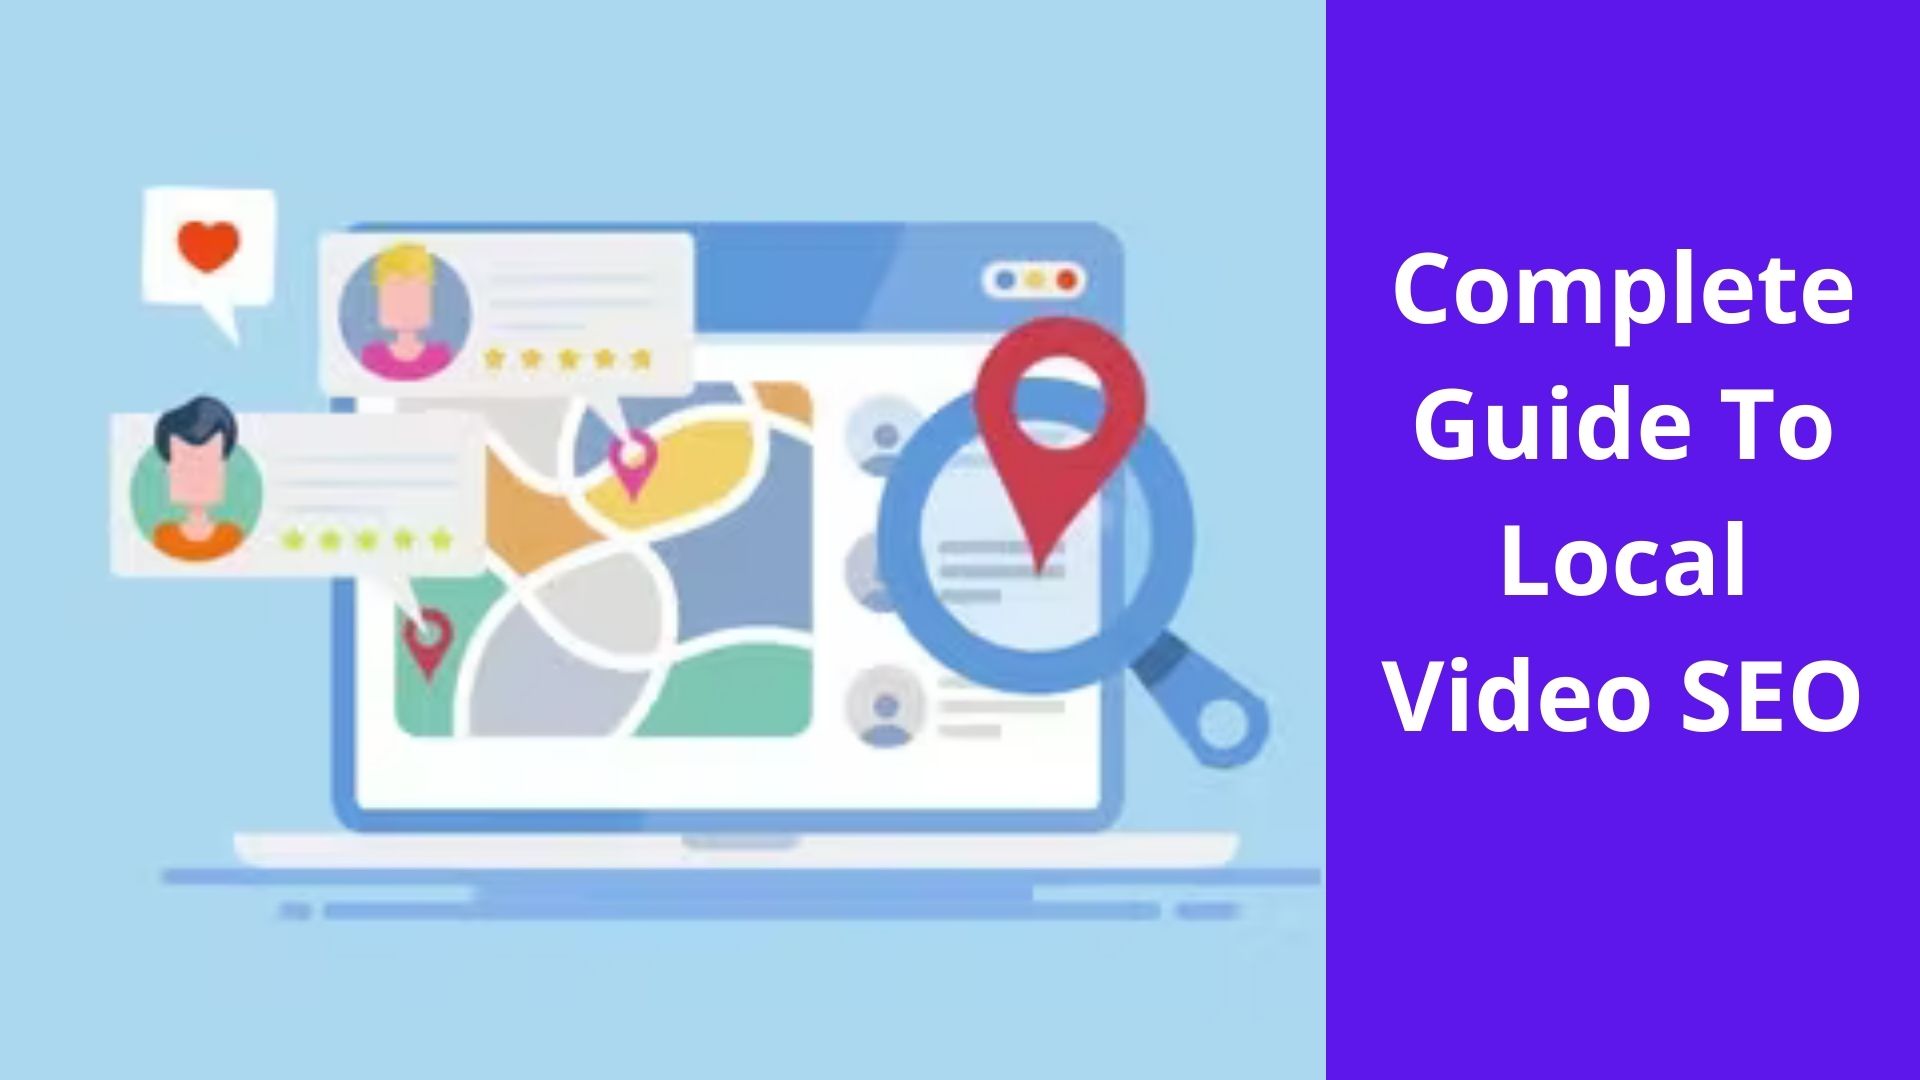 Complete Guide To Local Video SEO